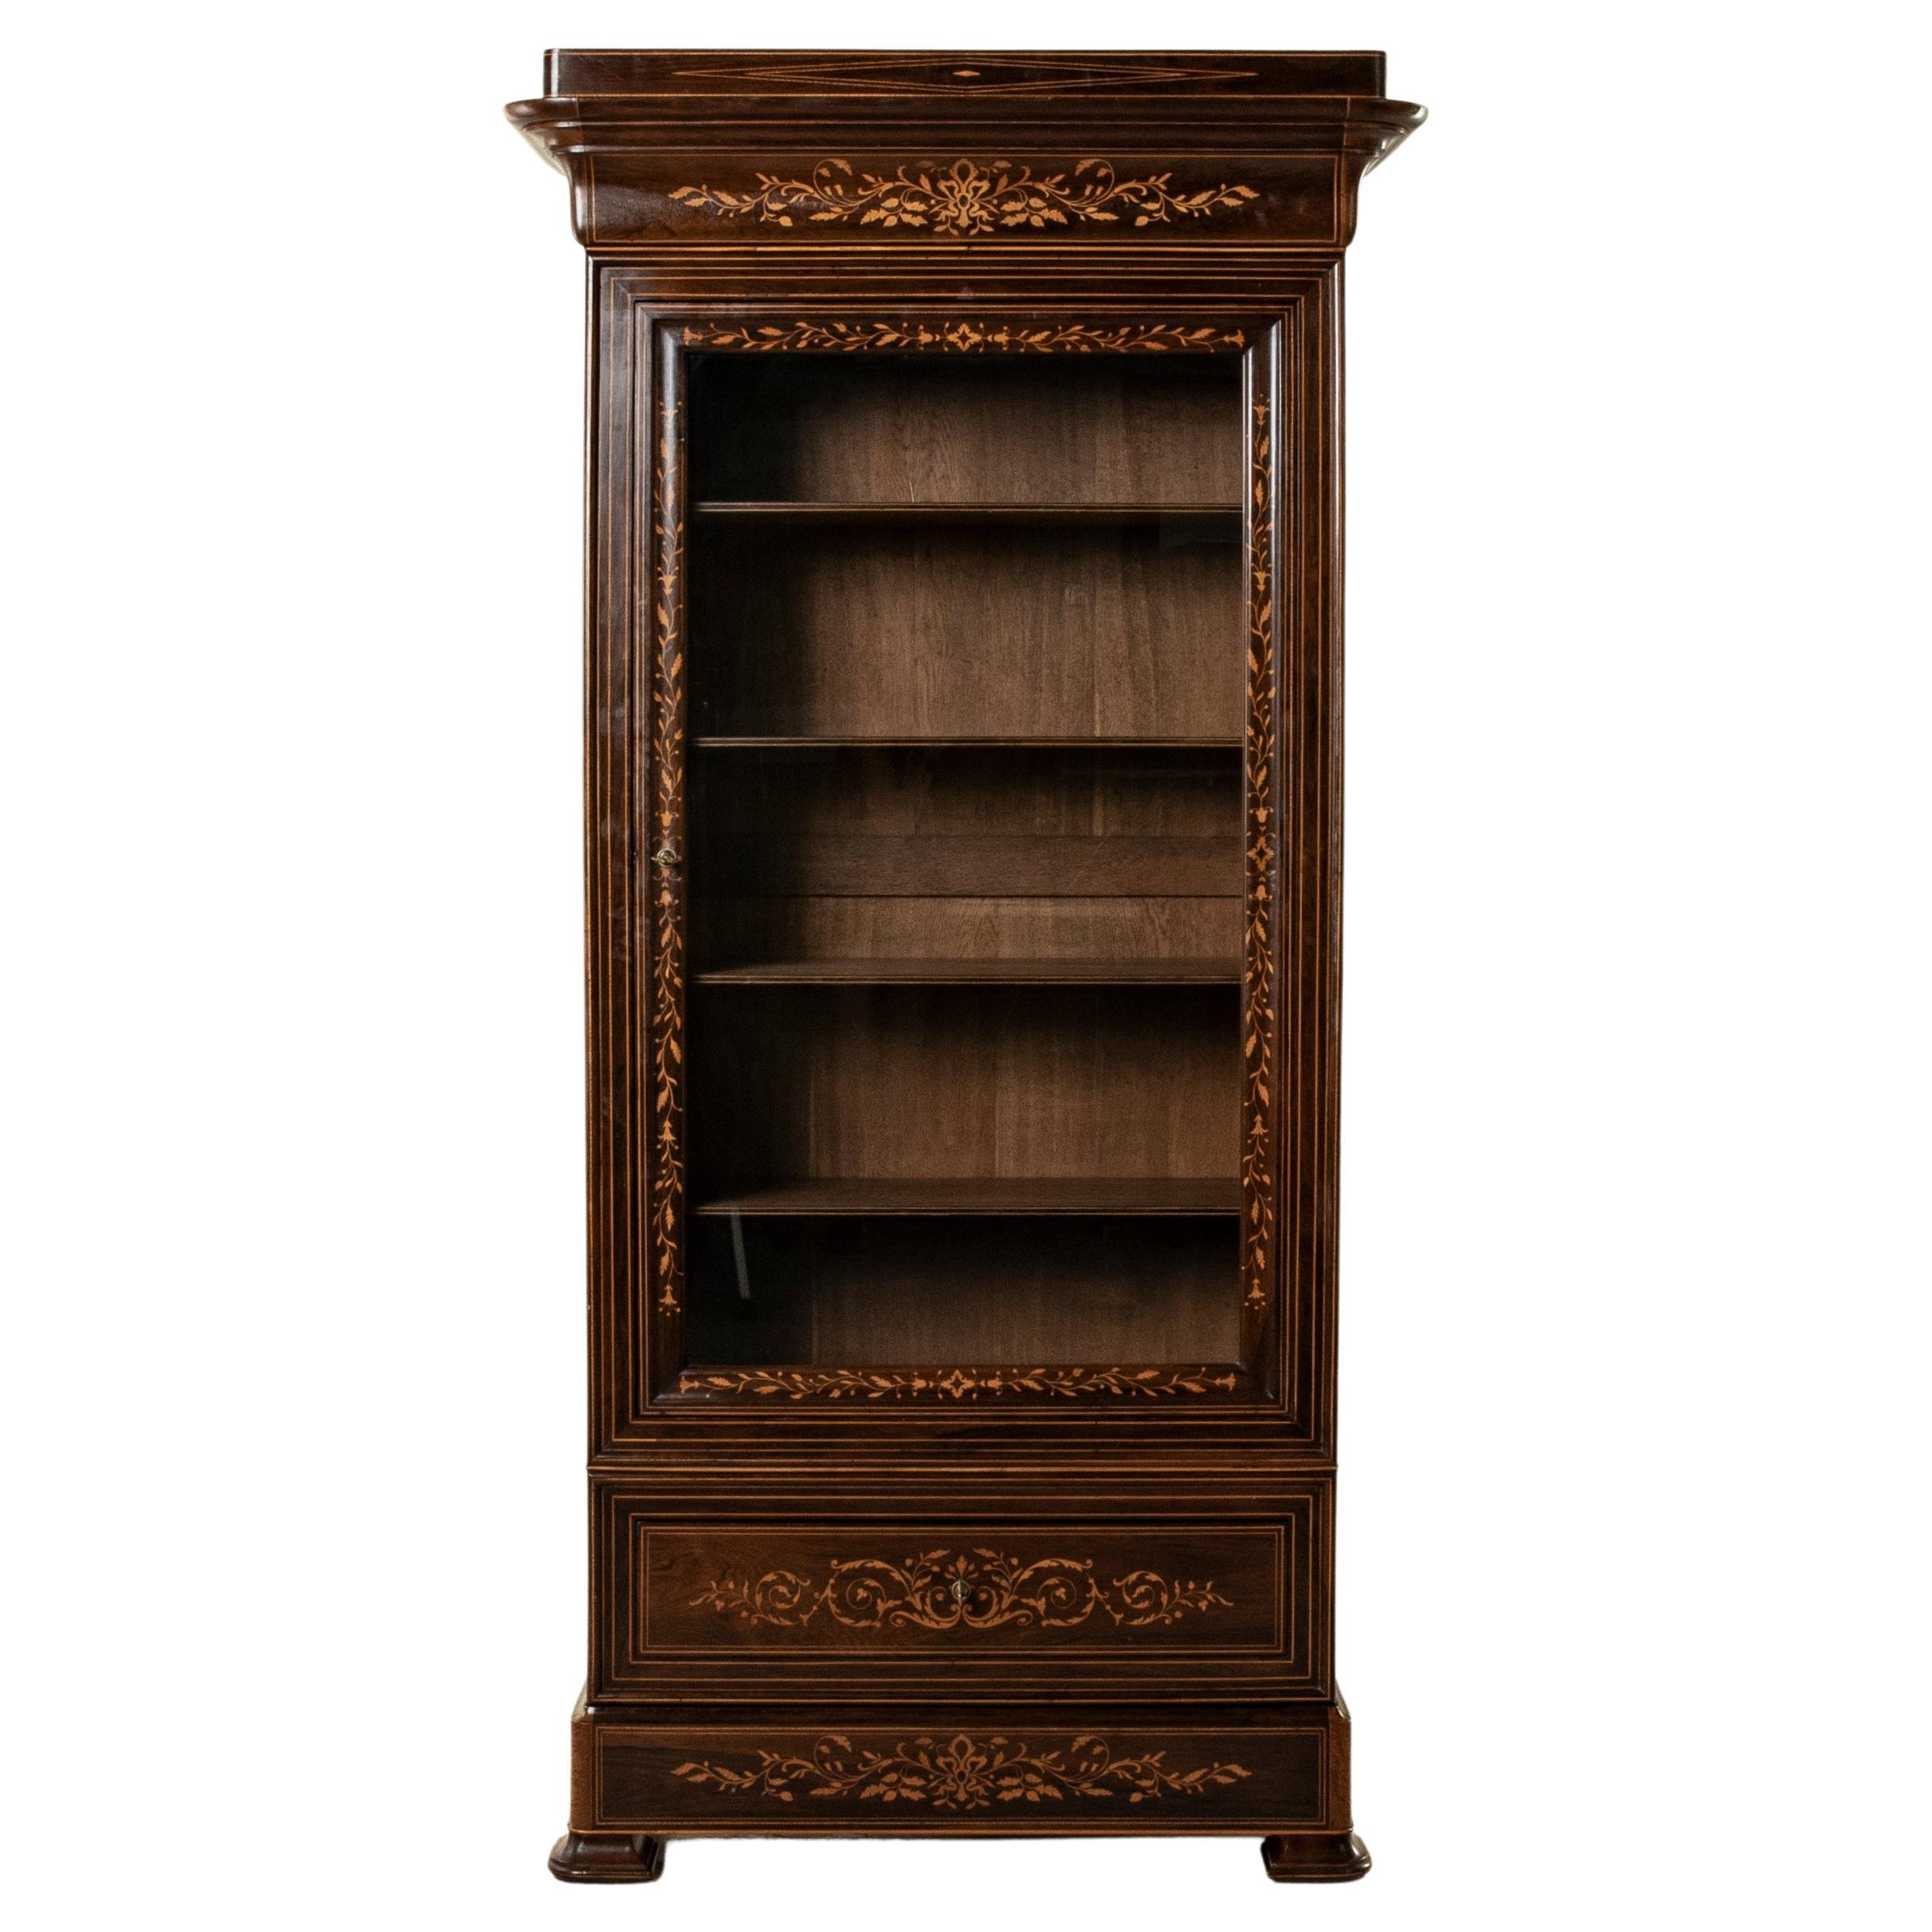 Early 19th Century French Charles X Period Palisander Vitrine, Bookcase